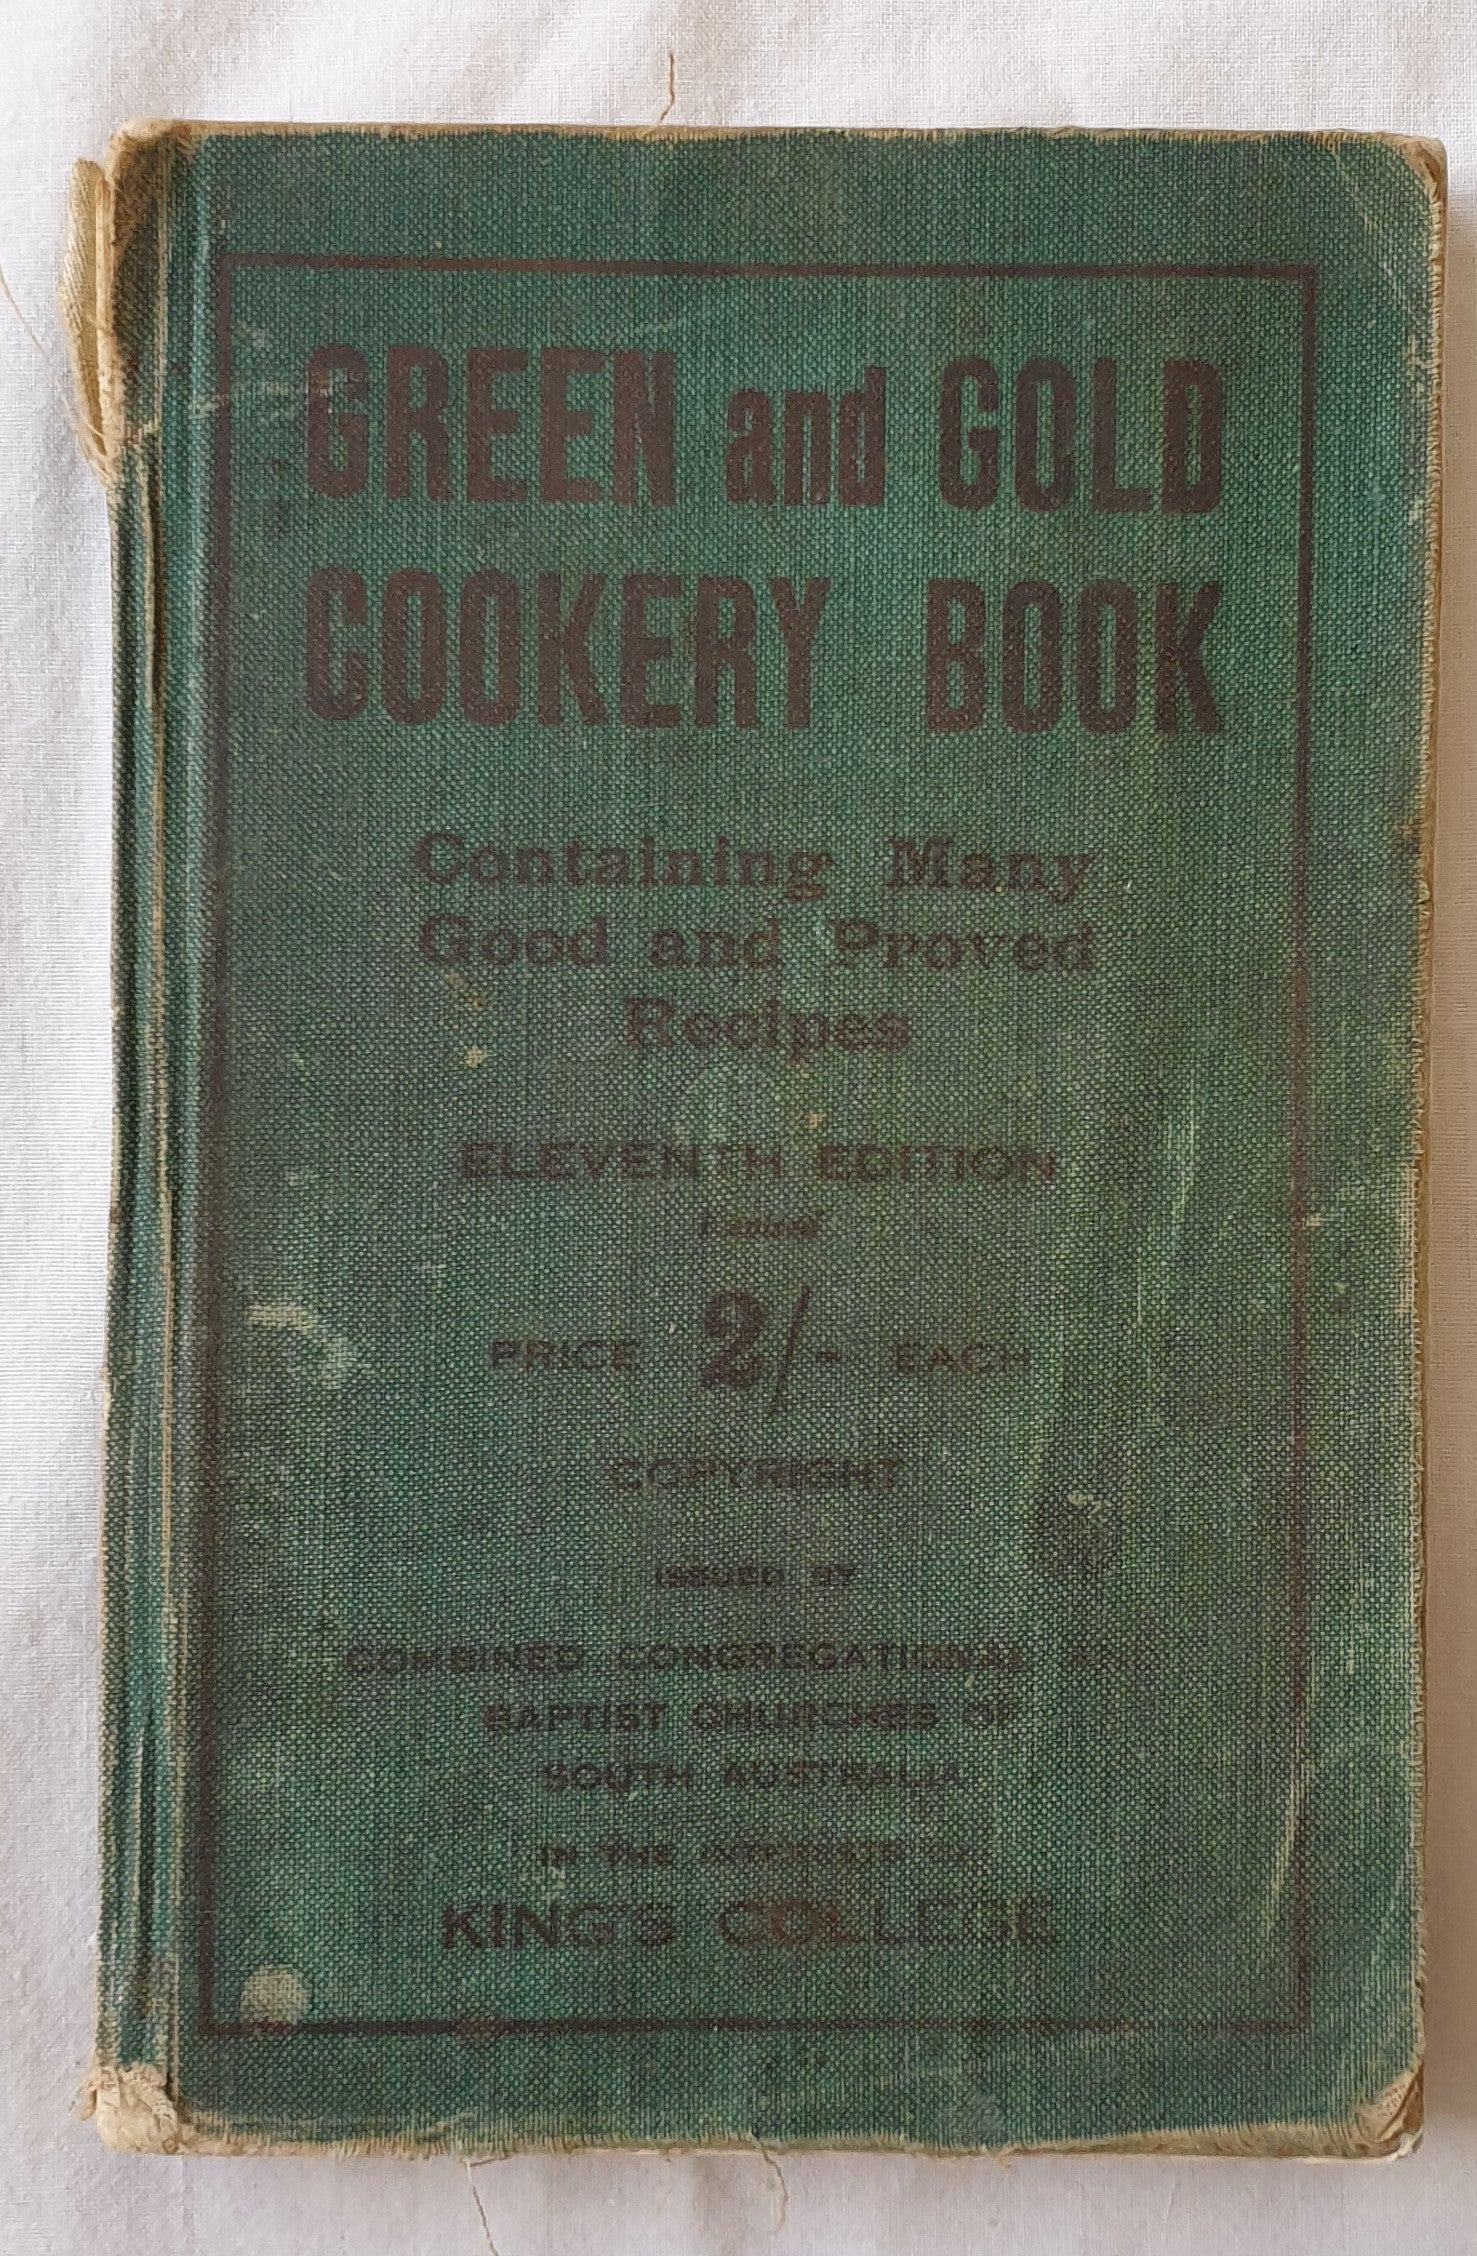 Green and Gold Cookery Book by King’s College